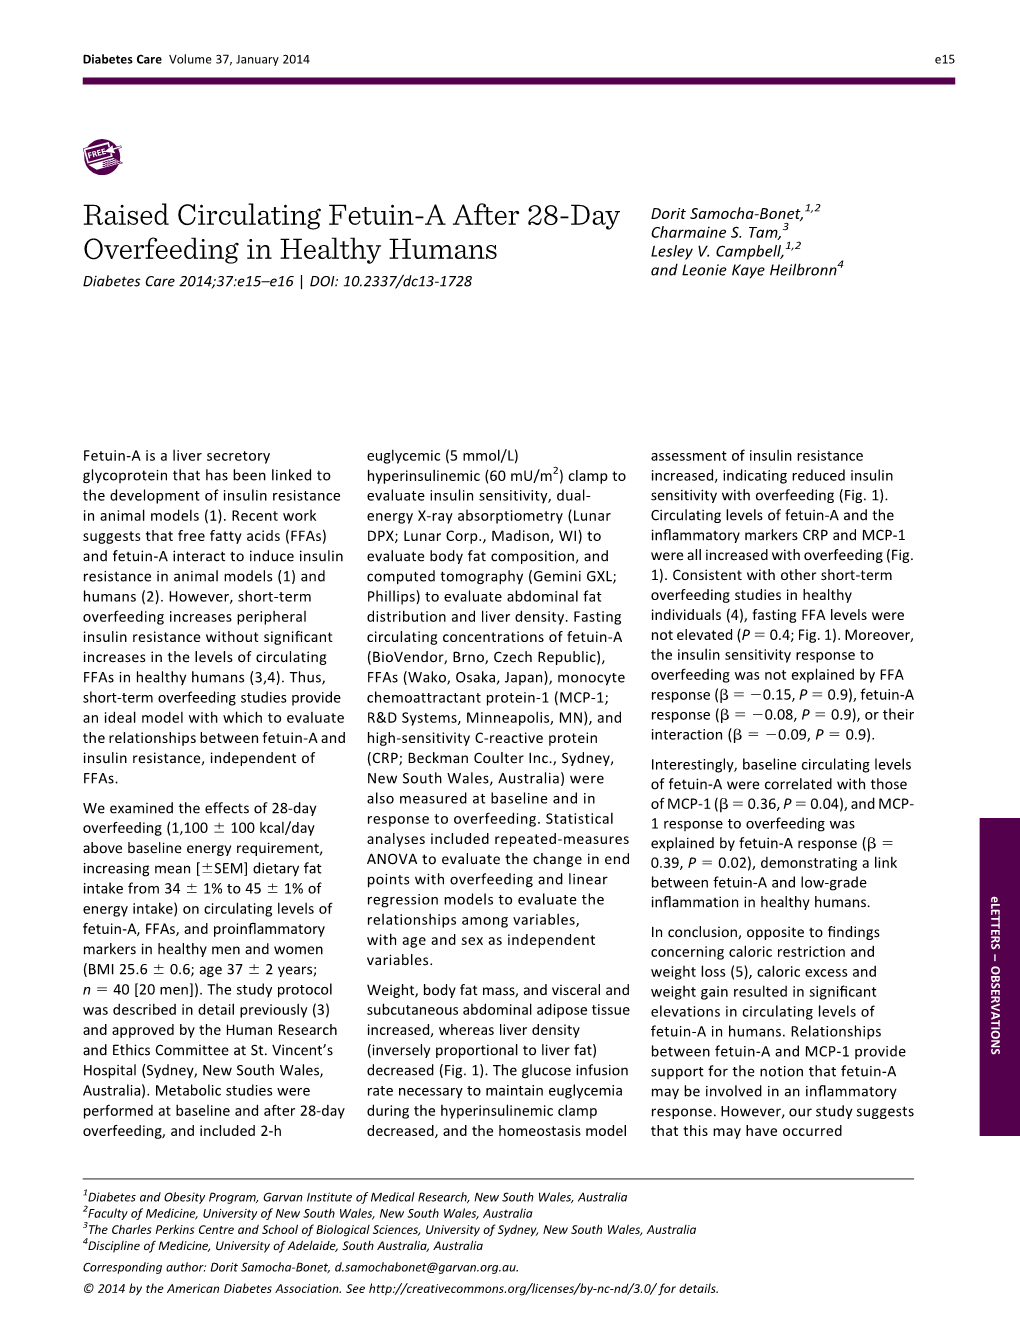 Raised Circulating Fetuin-A After 28-Day Overfeeding in Healthy